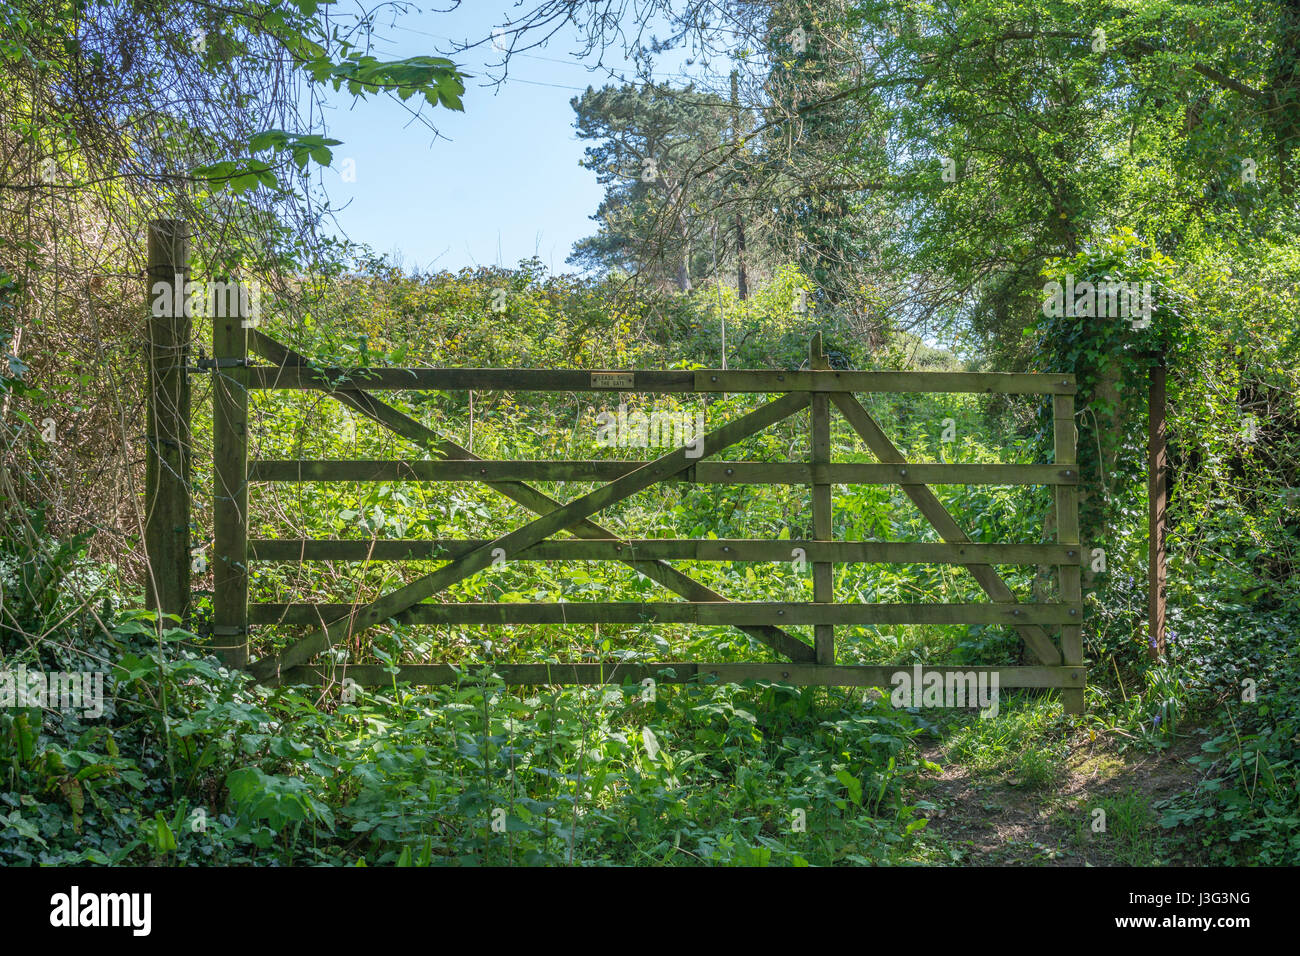 Closed wooden gate at entrance of an overgrown field / plot of land. Stock Photo